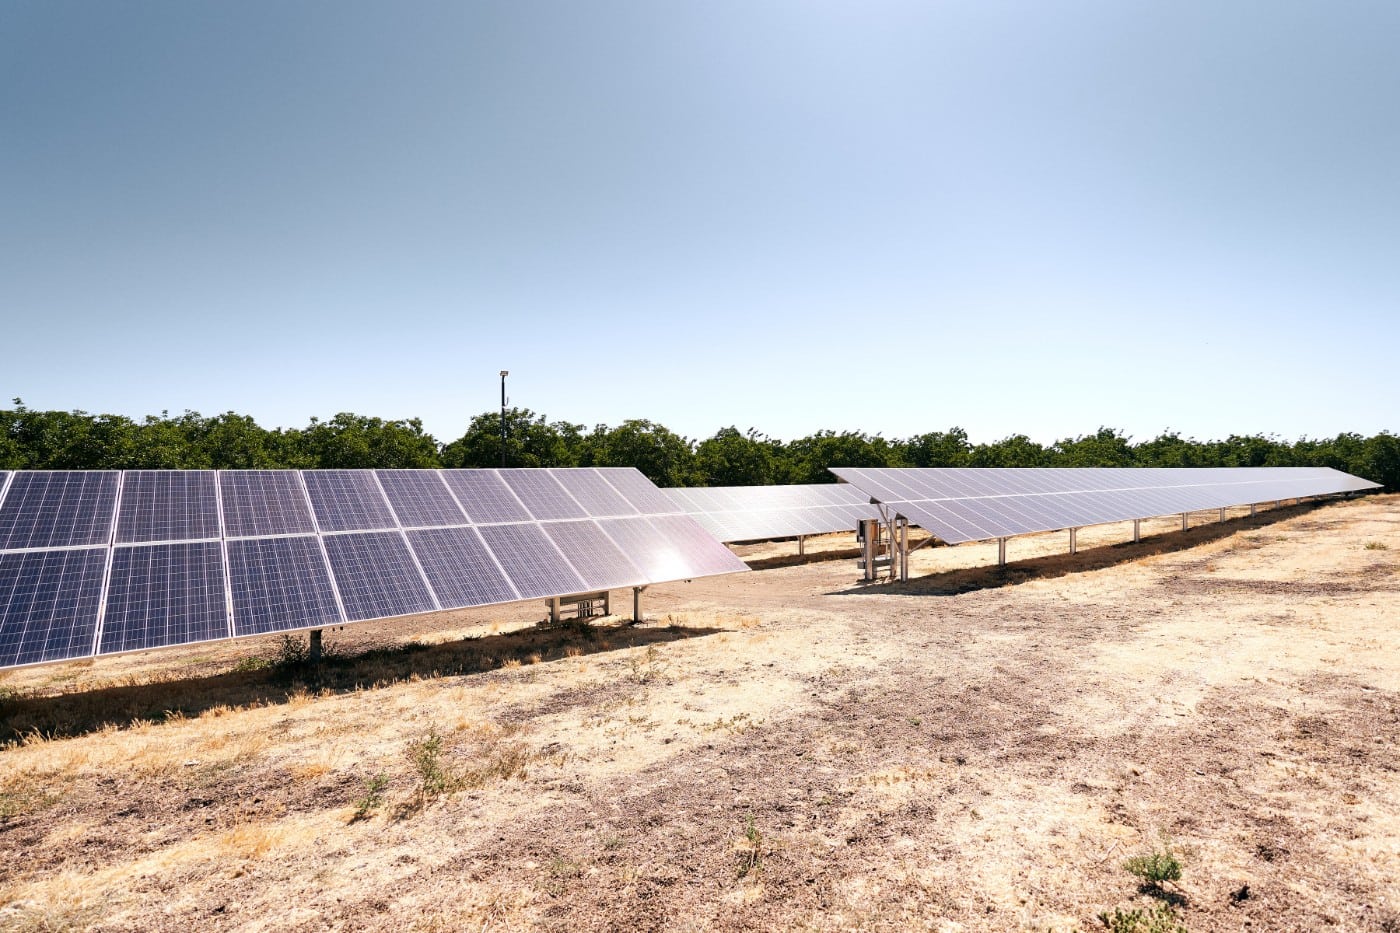 Two rows of solar panels backed by a row of trees and blue sky at Citrona Farms in Winters, California.